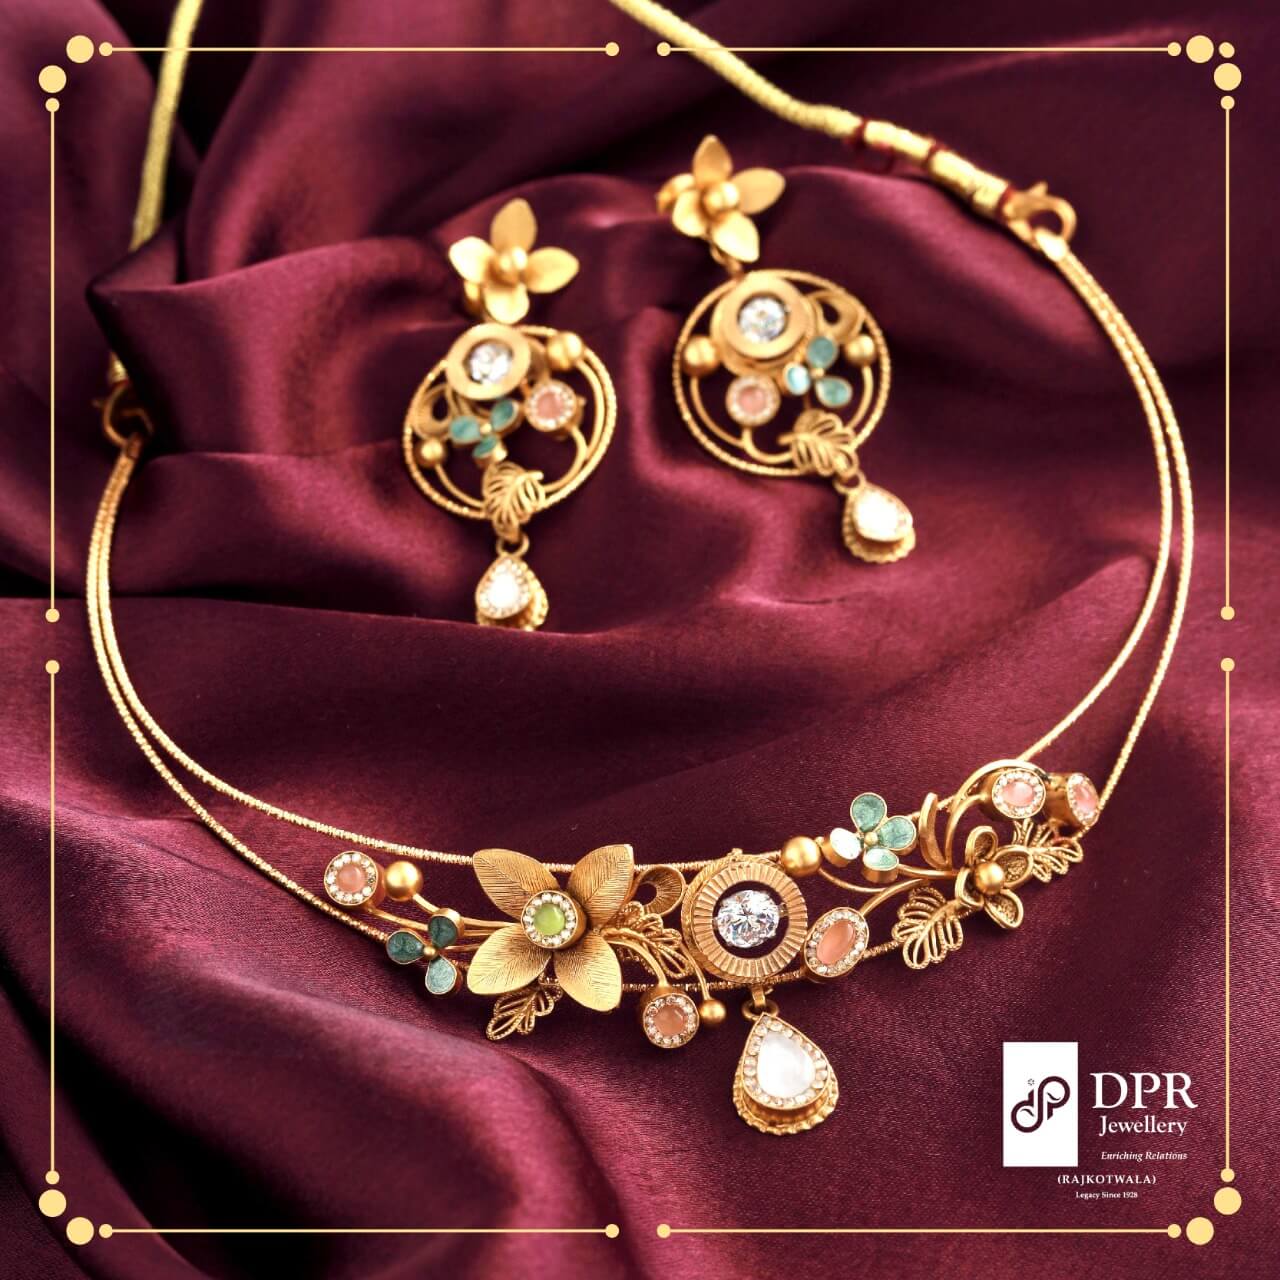 Heavenly Blessings Mini Fusion Chokar Necklace Set - A divine blend of traditional artisanship and contemporary design, handcrafted with Swarovski Kundan stones, showcasing the unique jewellery designing and curation at DPR Jewellery in Ahmedabad, Gujarat.